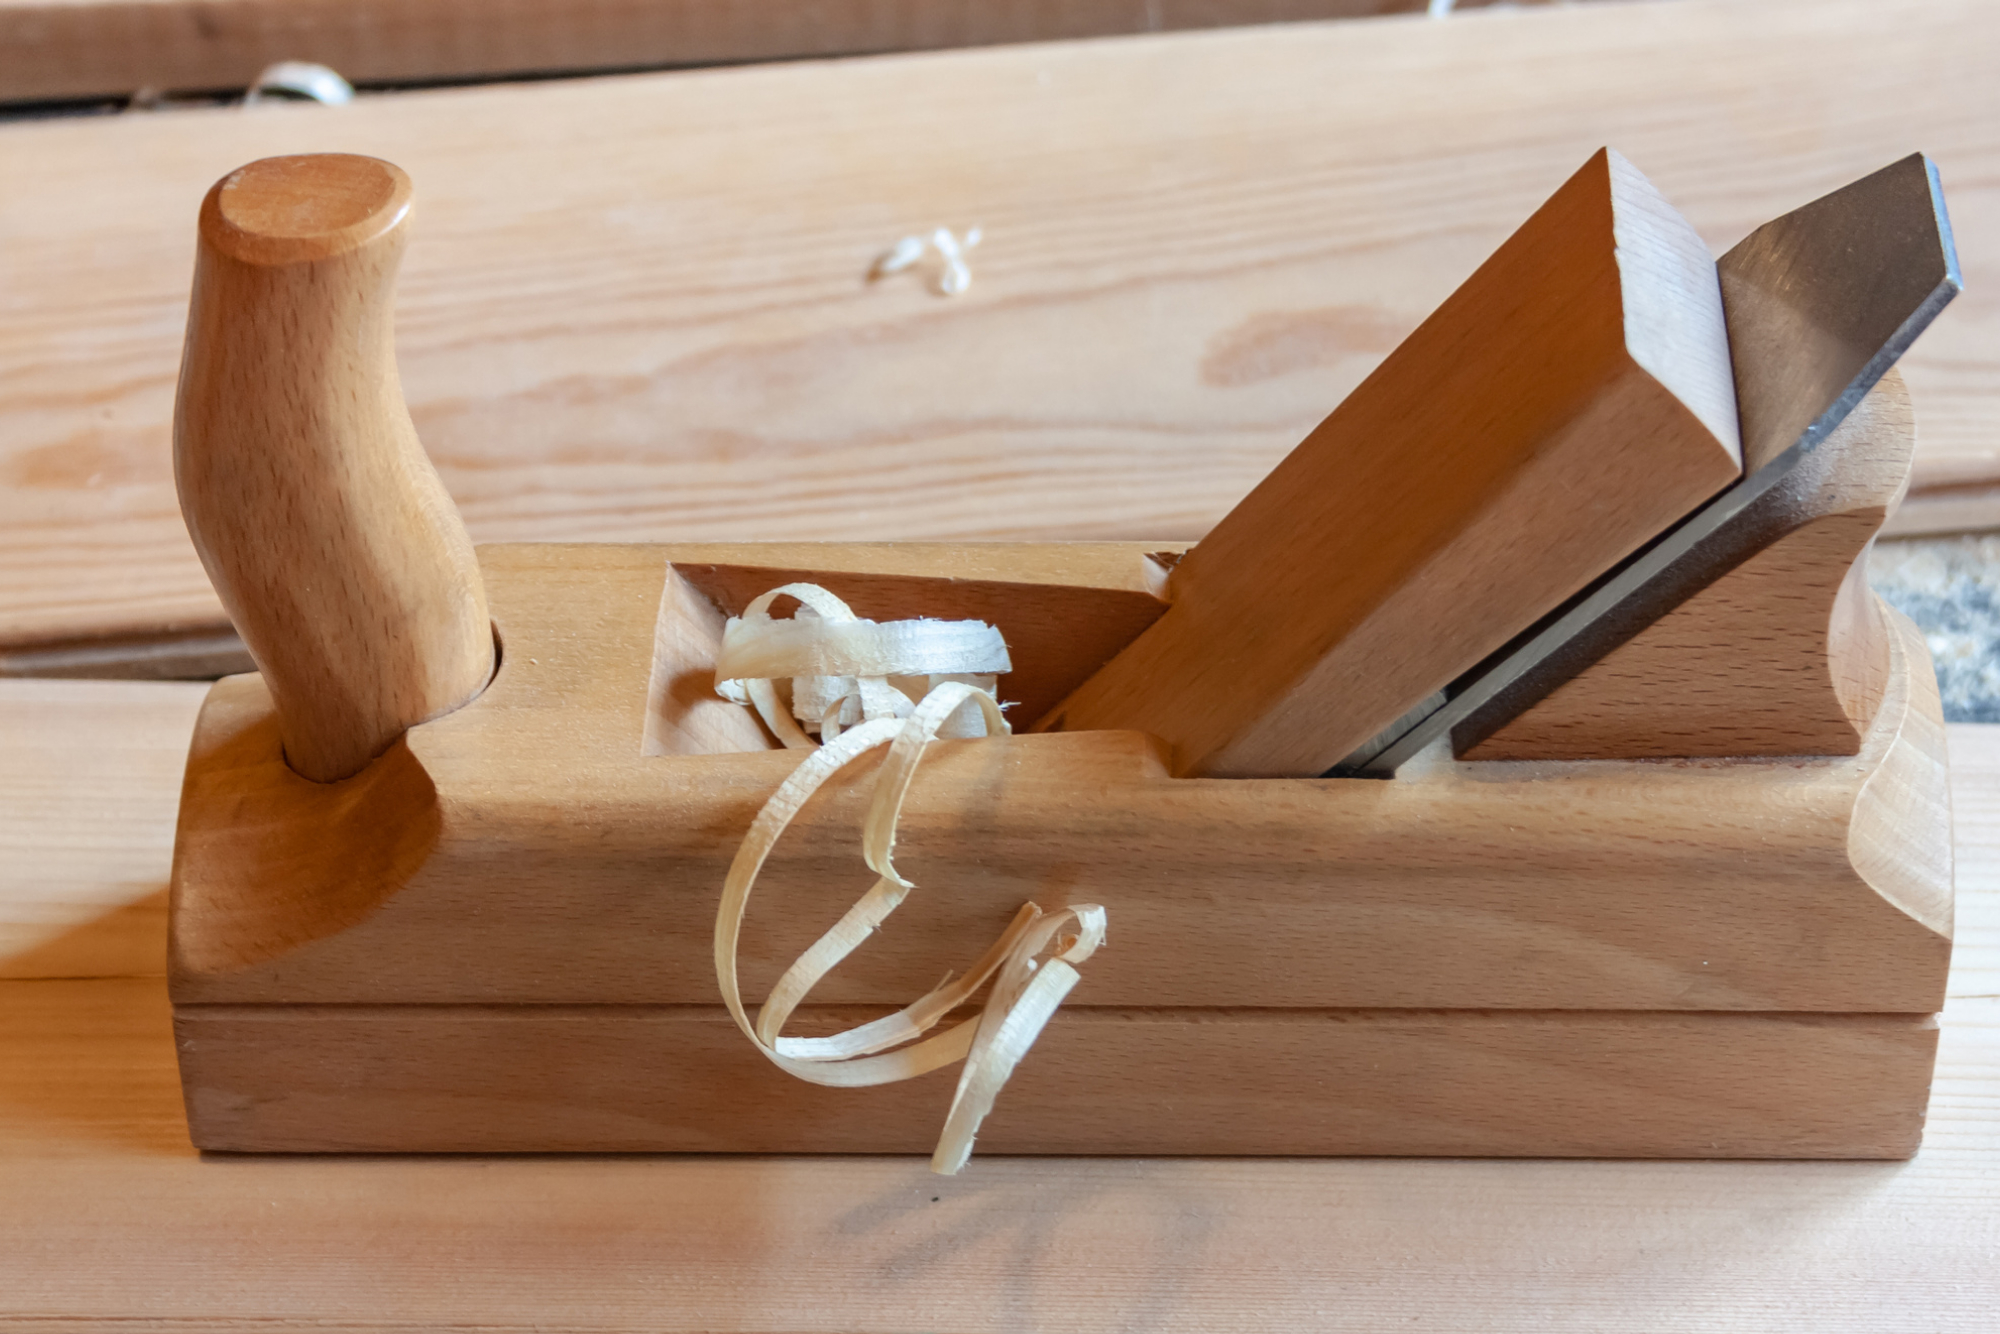 What Are The Parts Of A Wooden Hand Plane?